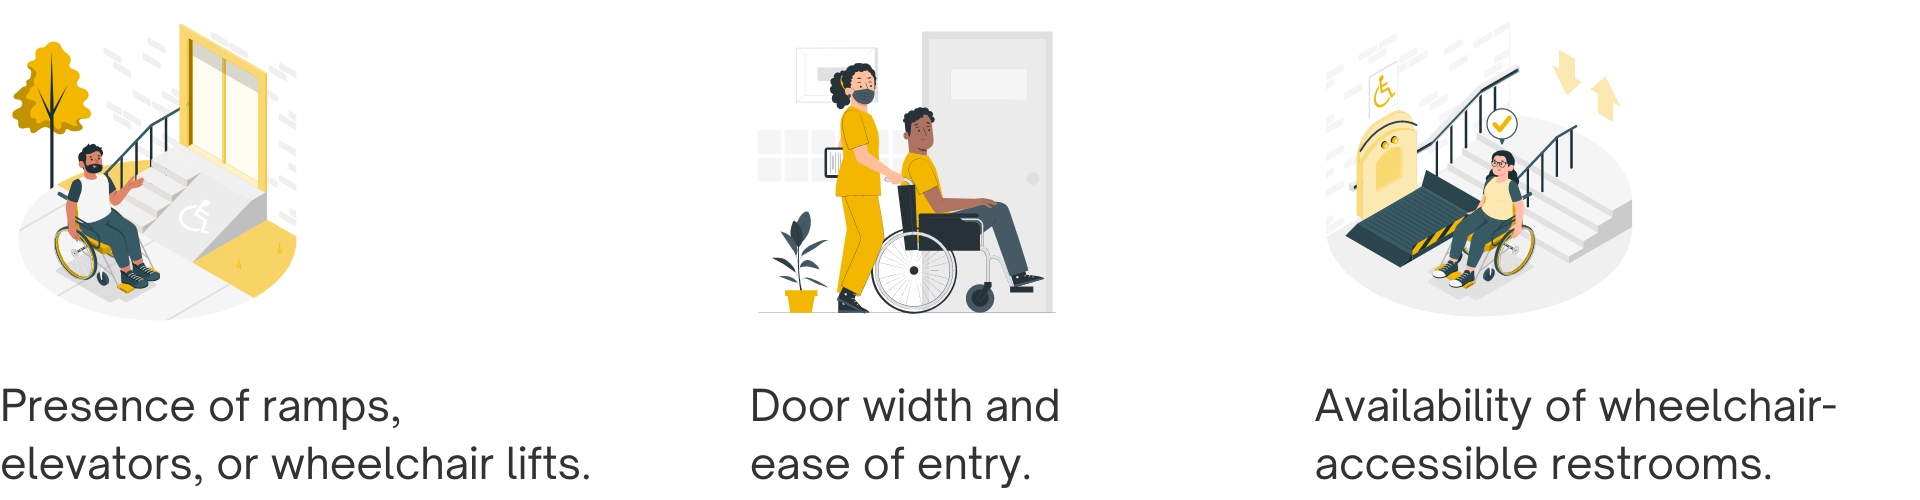 Wheelchair accessiblity graphics (with captions)